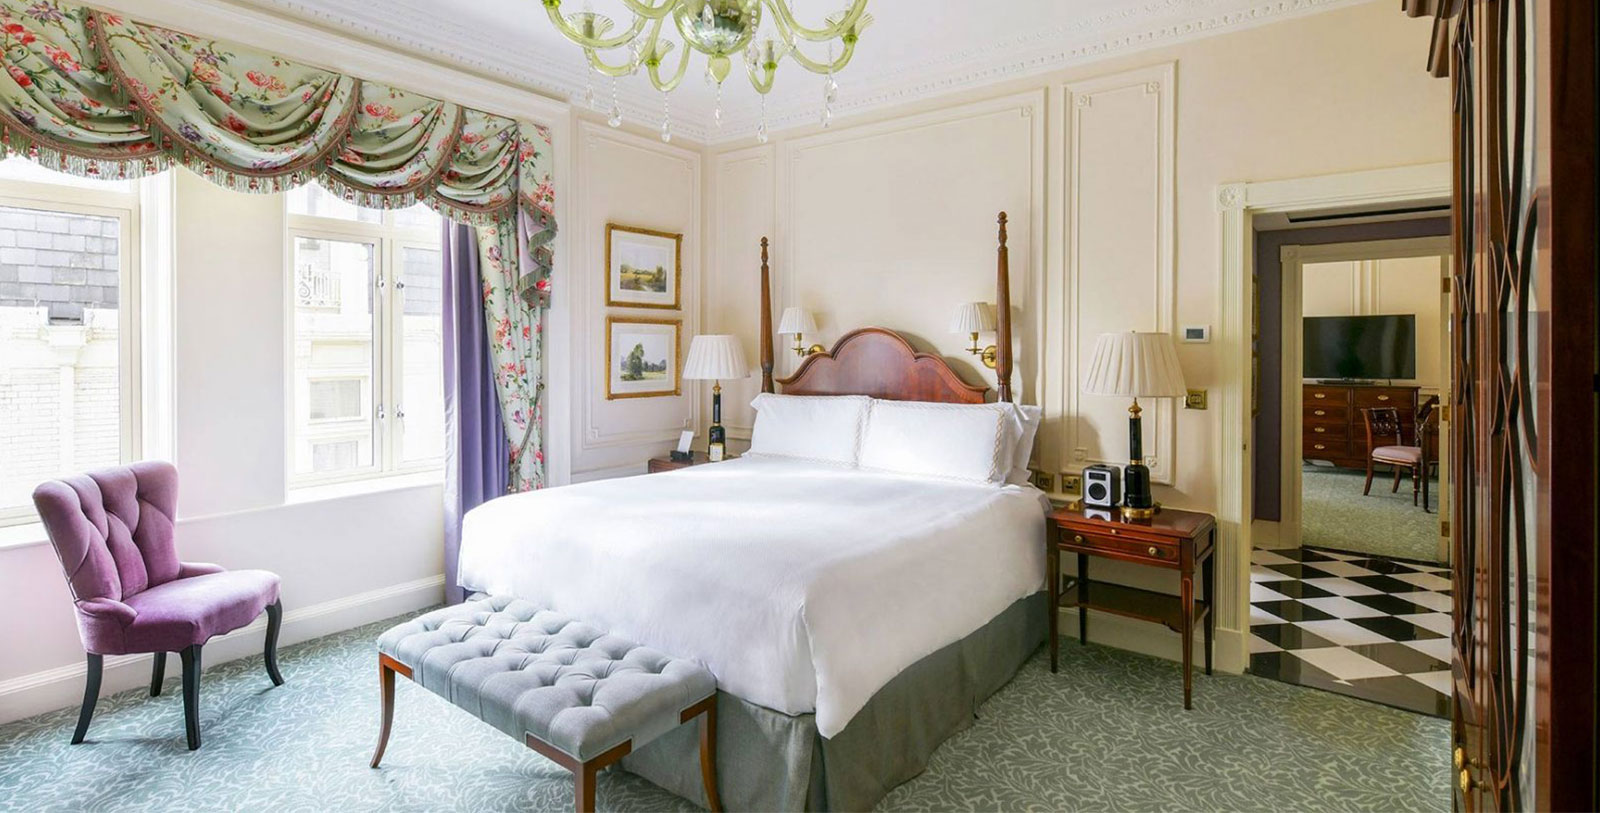 Image of Deluxe Junior Suite at The Savoy London, 1889, Member of Historic Hotels Worldwide, in London, England, United Kingdom, Accommodations